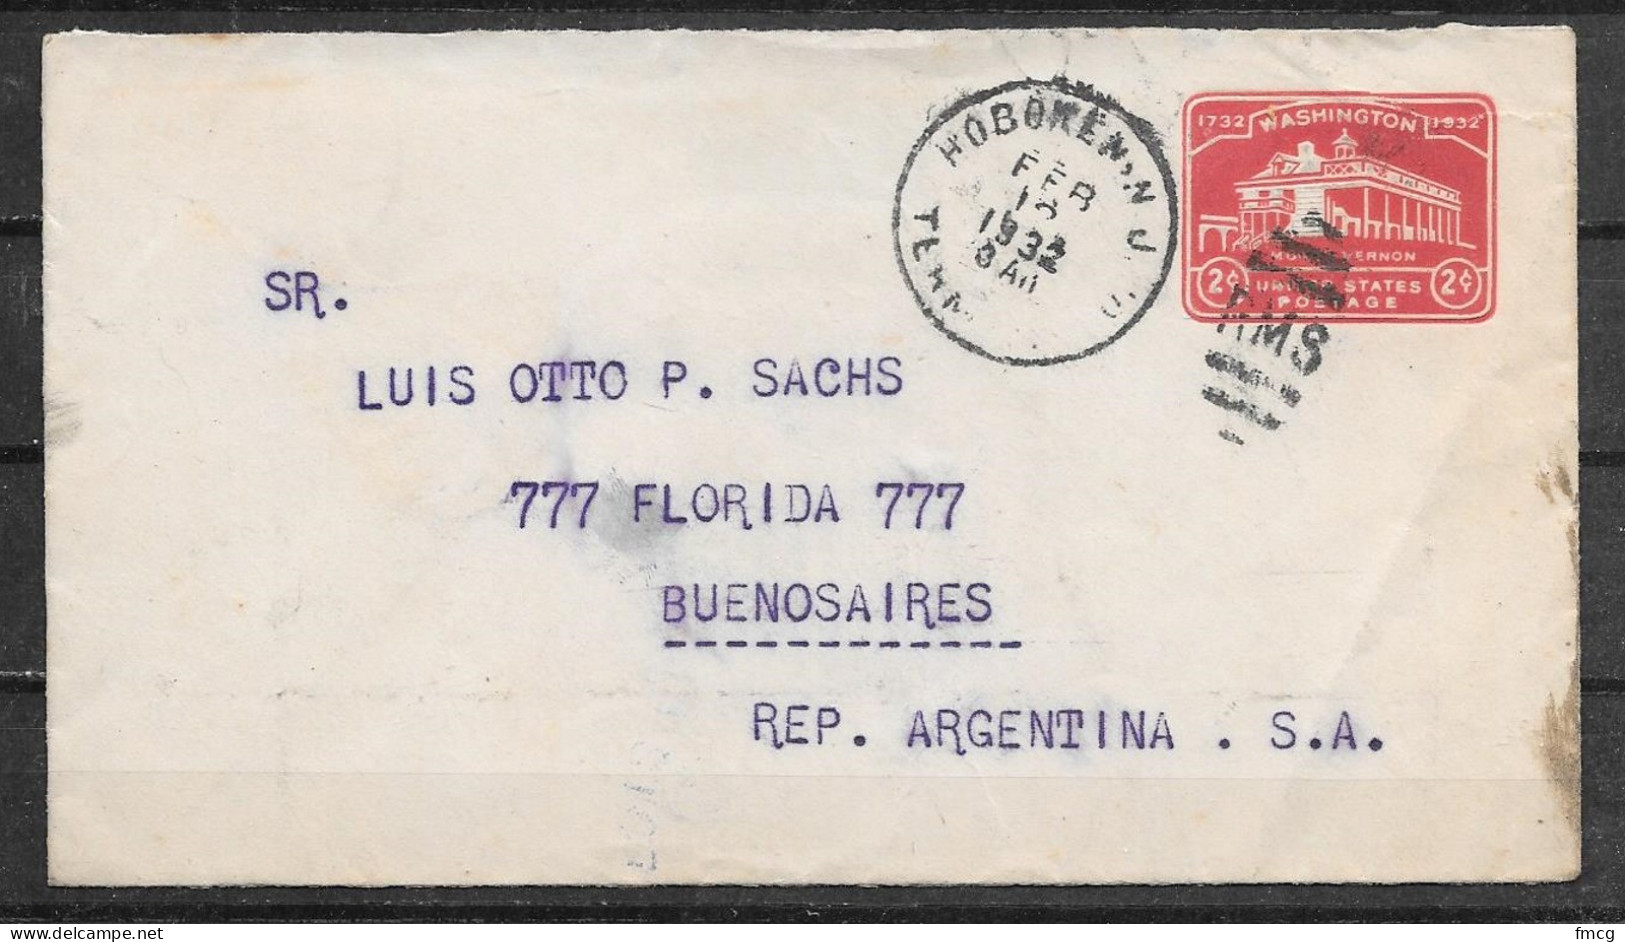 1932 2 Cents Envelope Hoboken NJ Terminal (Feb 18) To Buenos Aires Argentina - Covers & Documents